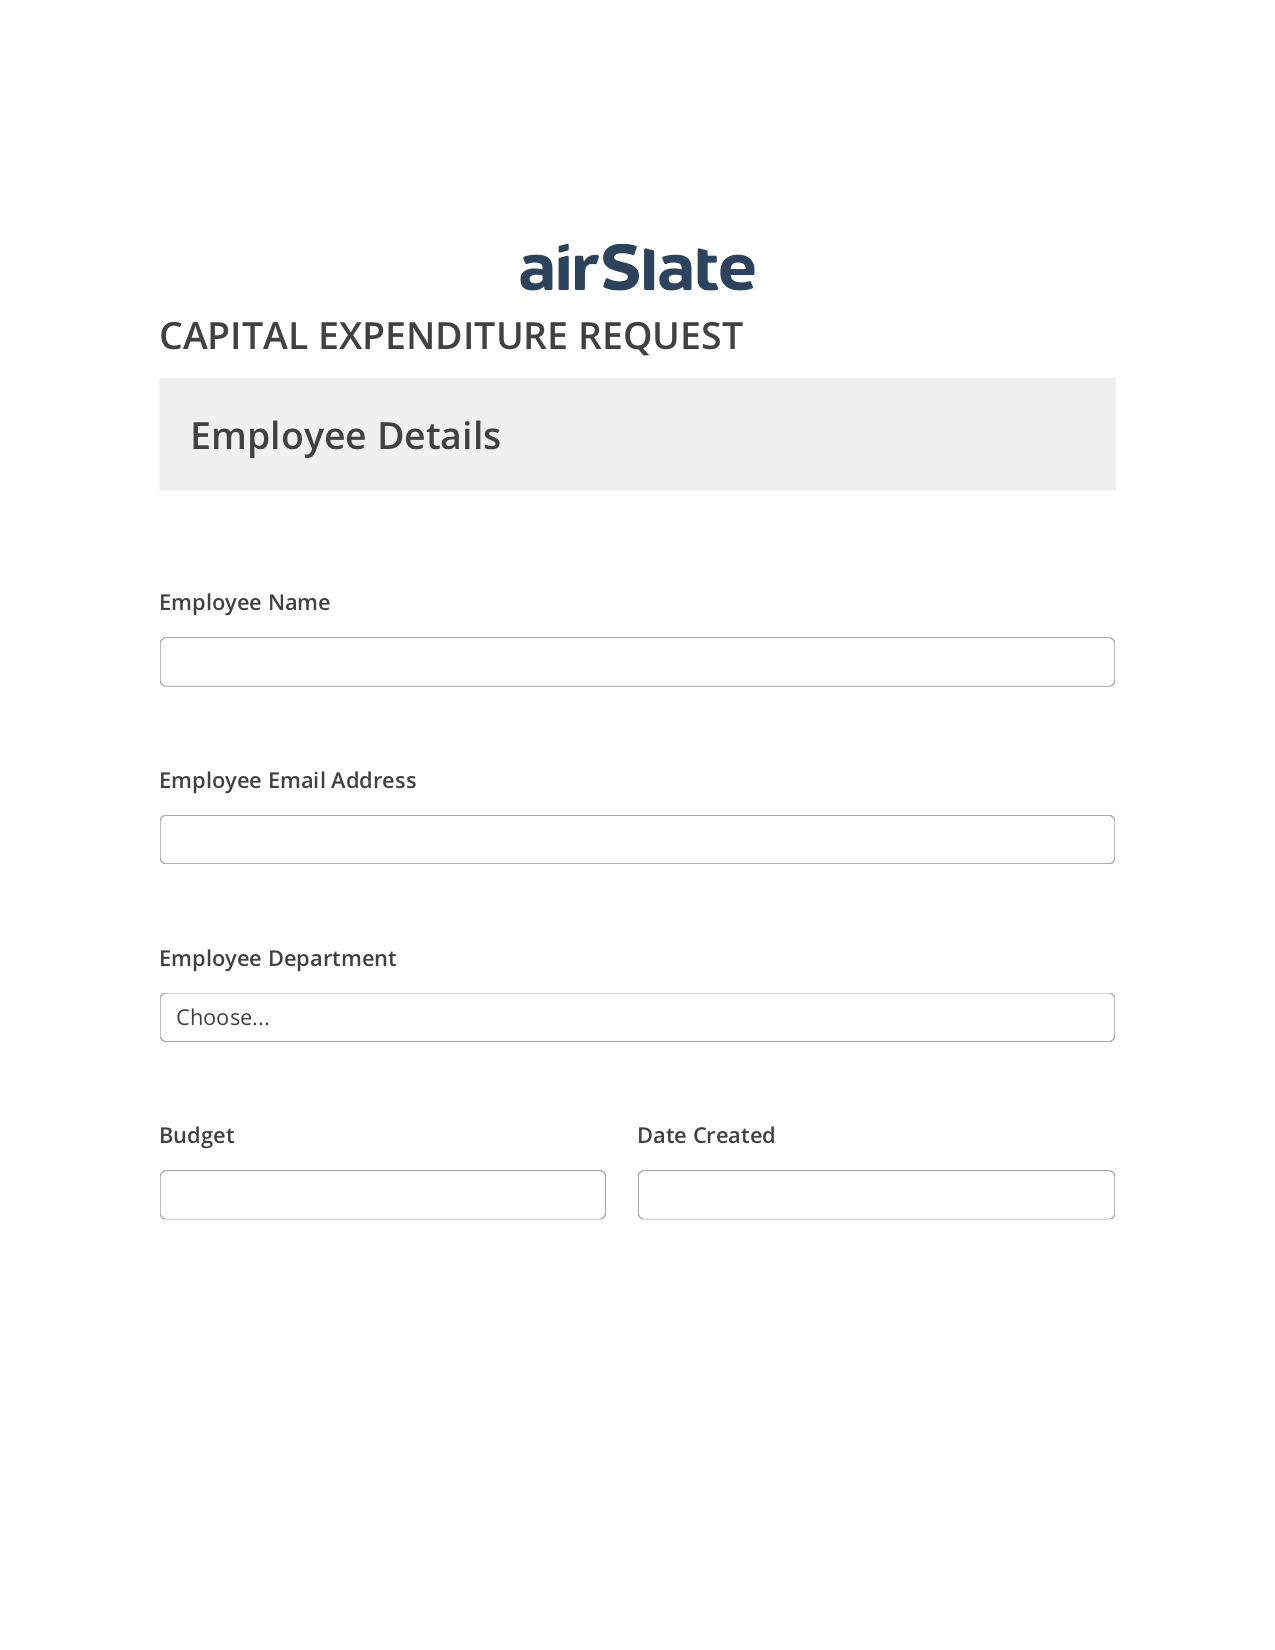 Capital Expenditure Request Approval Workflow Pre-fill from CSV File Bot, Custom Field's Value Bot, Export to Salesforce Bot